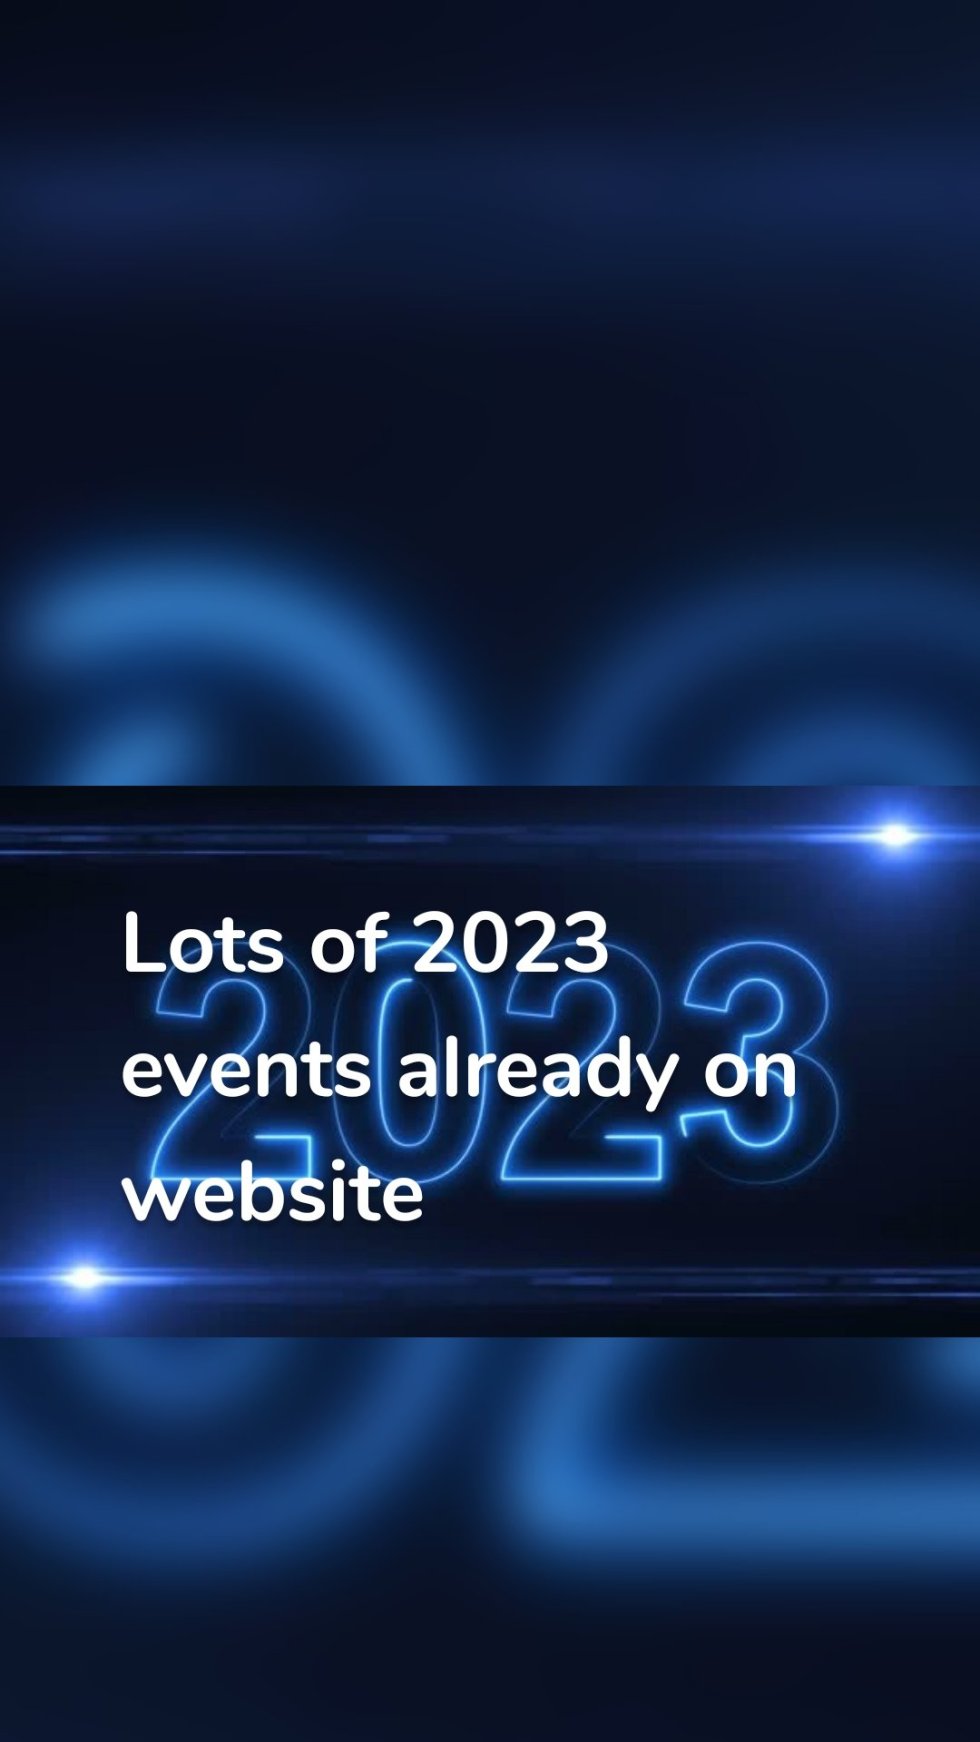 Lots of 2023 events already on website